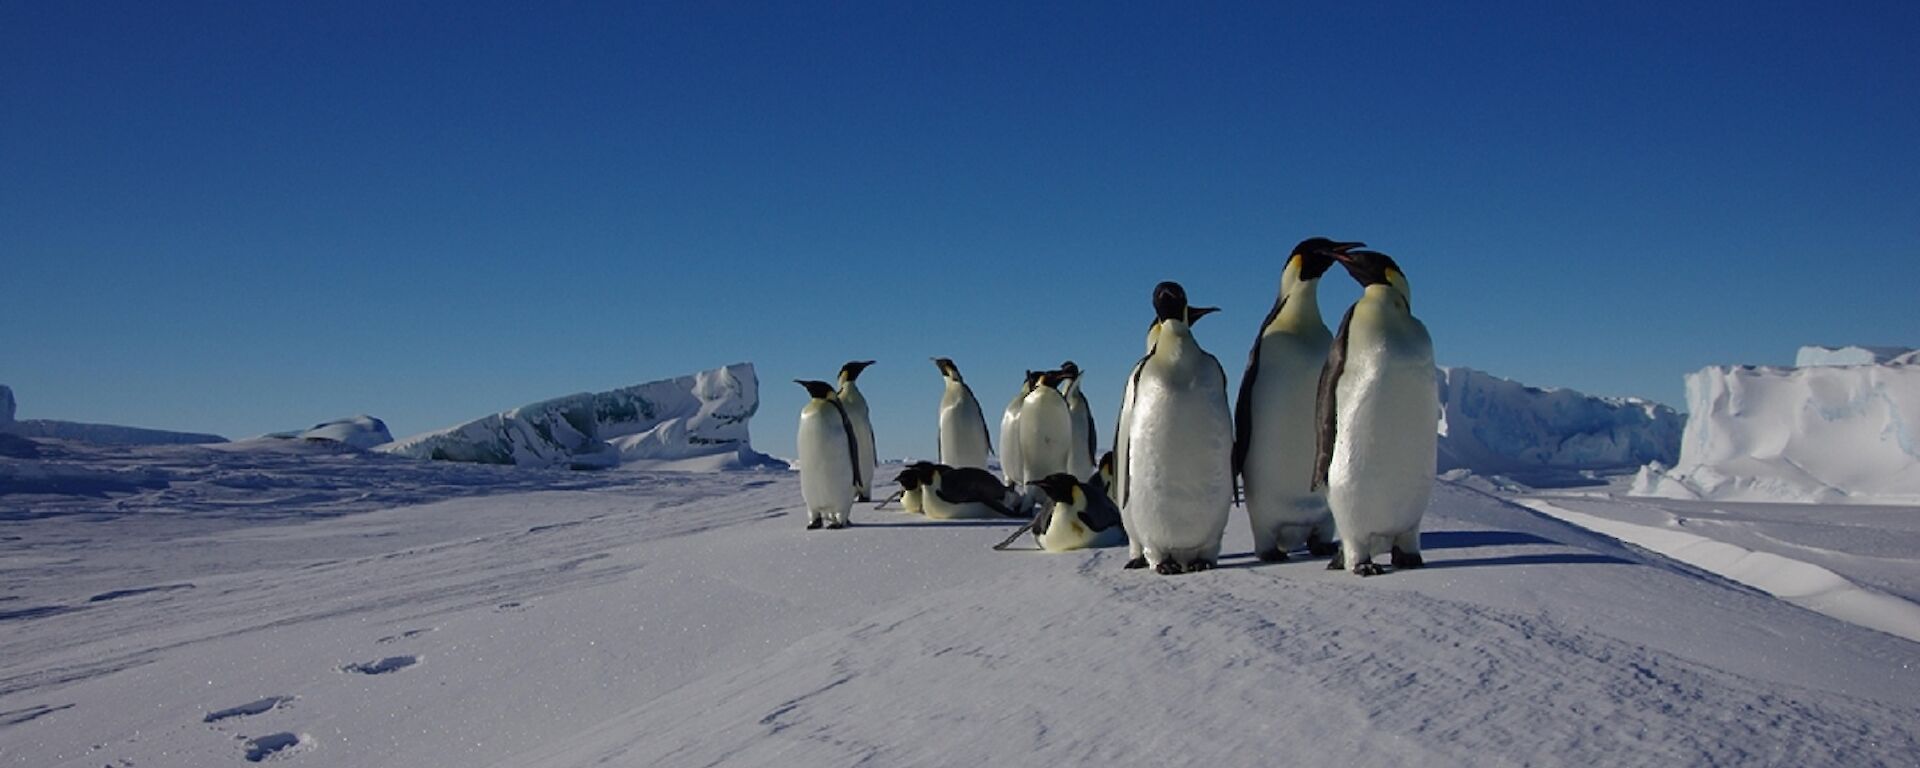 Ten emperor penguins stand on a snow embankment with a jade berg behind them.